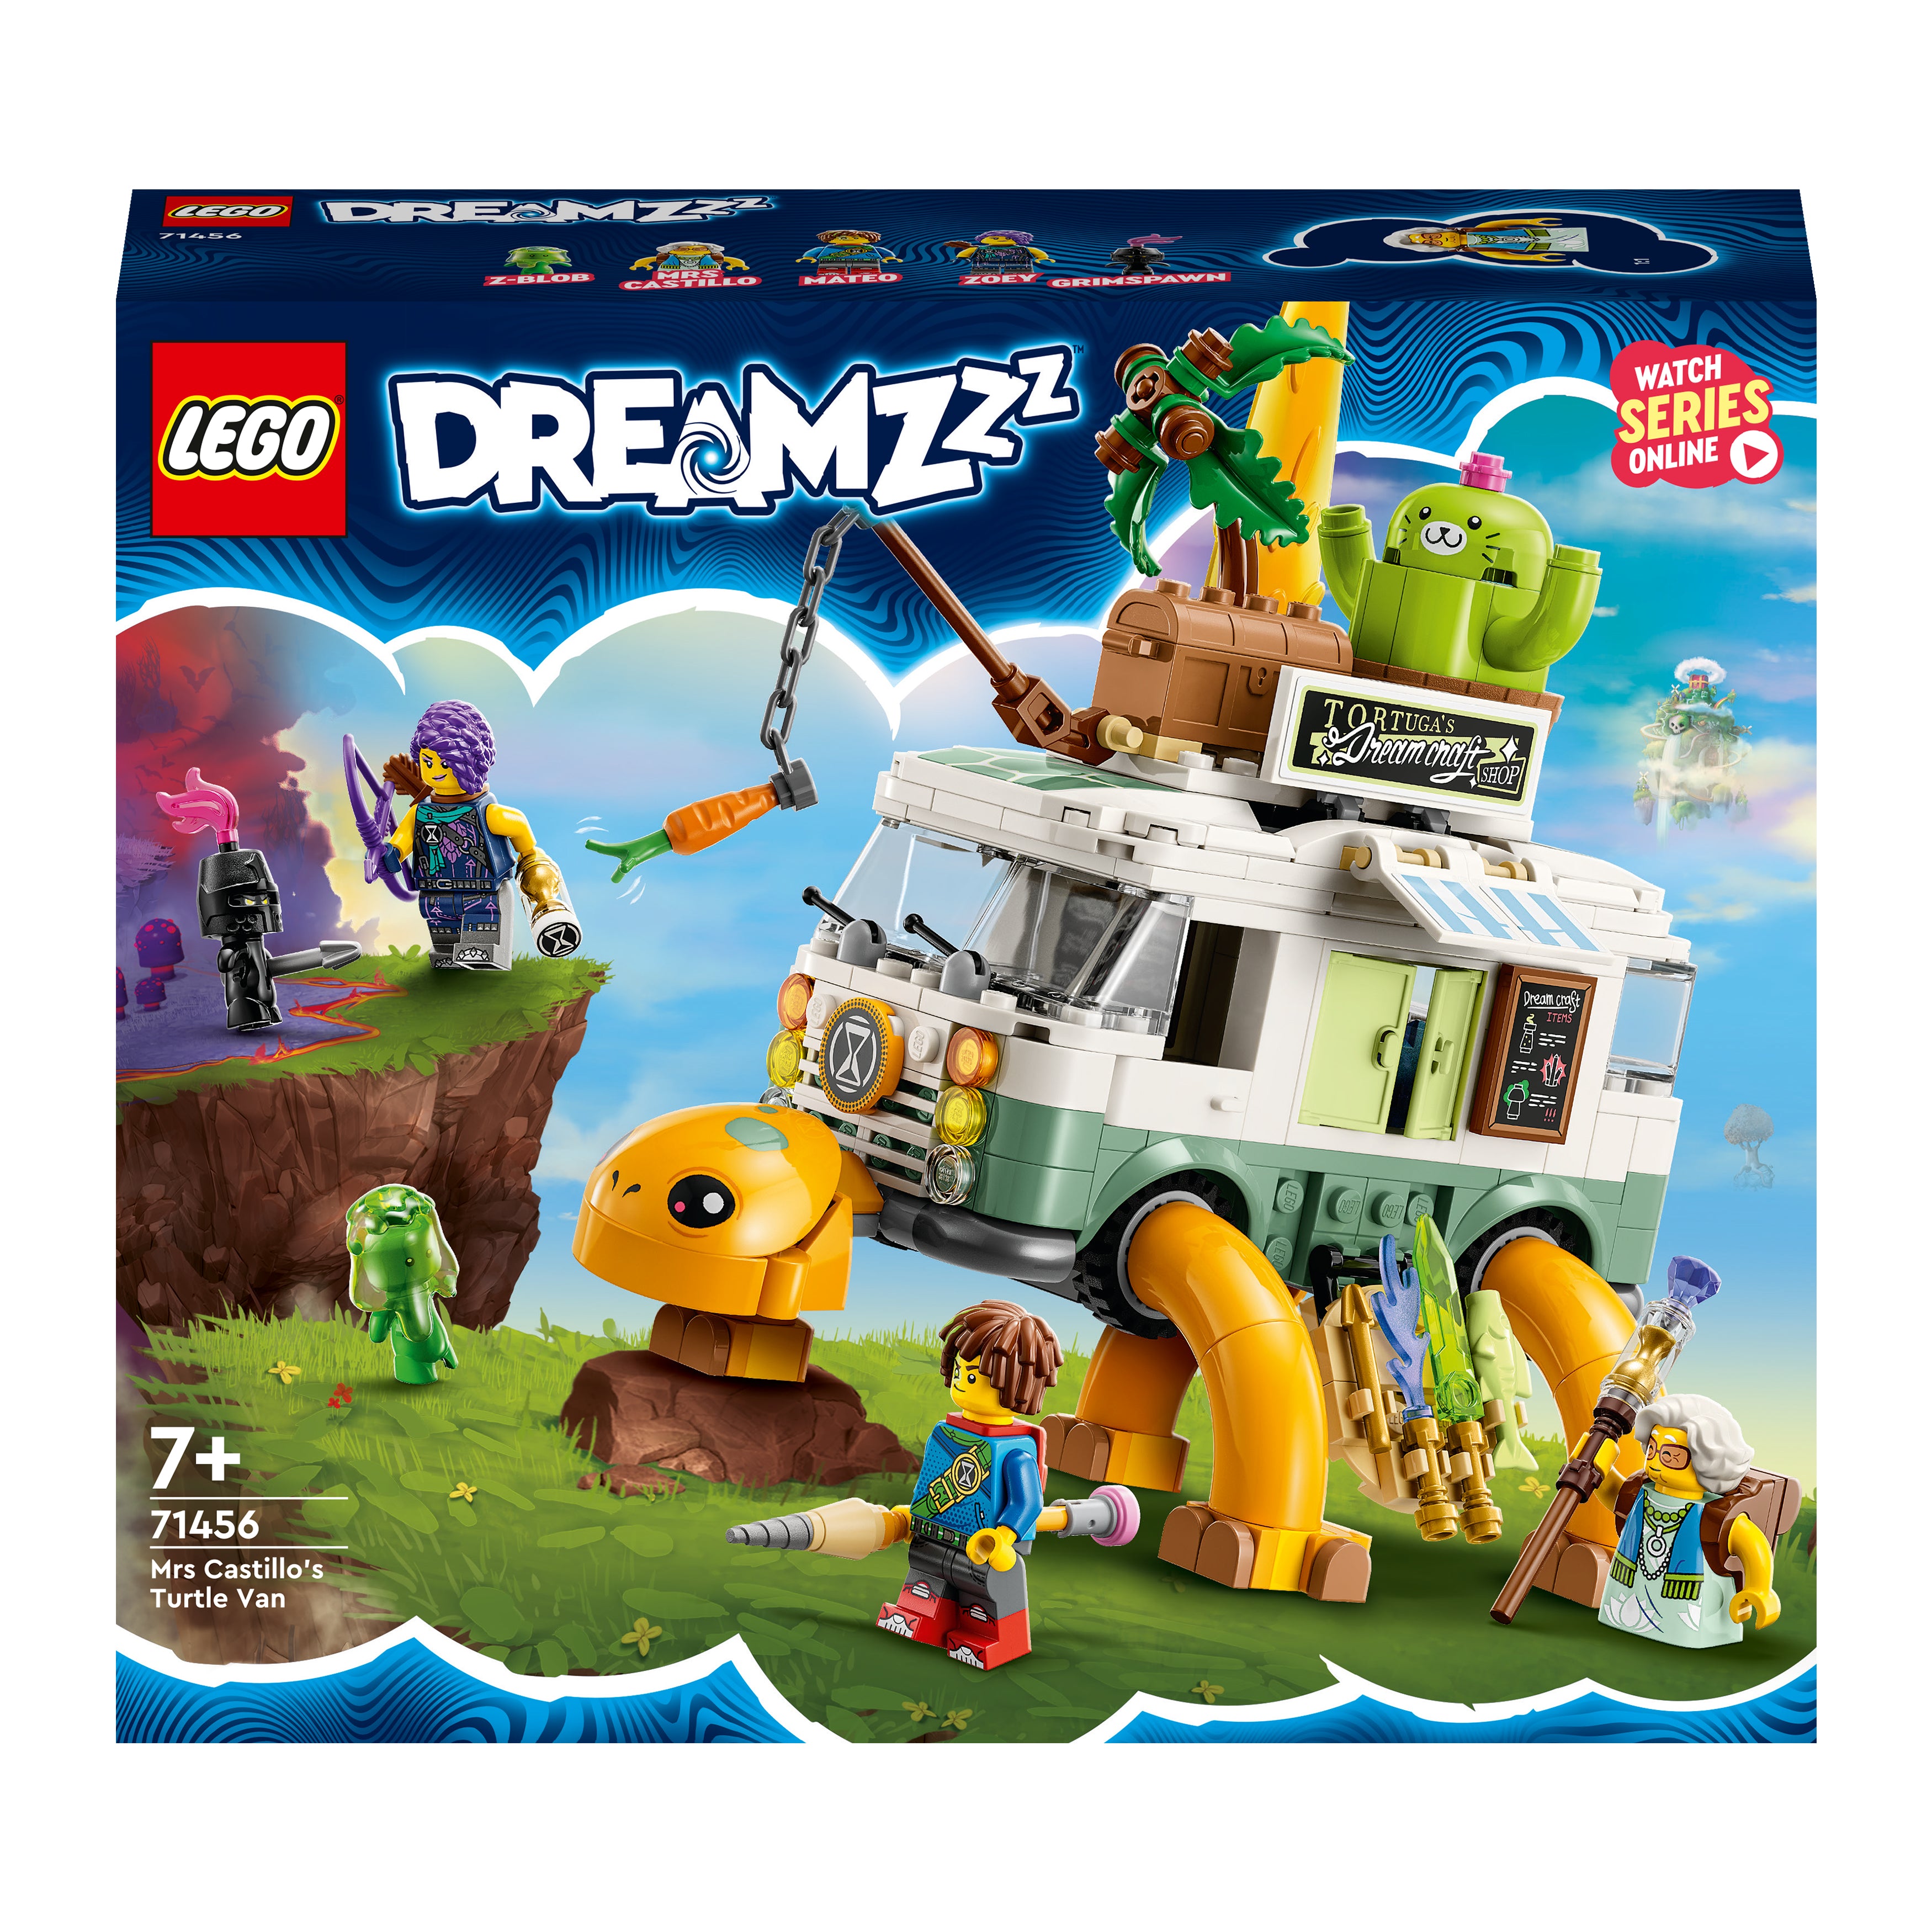 Lego DREAMZzz Nightmare Shark Ship 71469 Building Toy Set, Pirate Ship and  Monster Vehicle Toy for Creative Play, Gift for Tweens and Kids Ages 10+ :  : Toys & Games